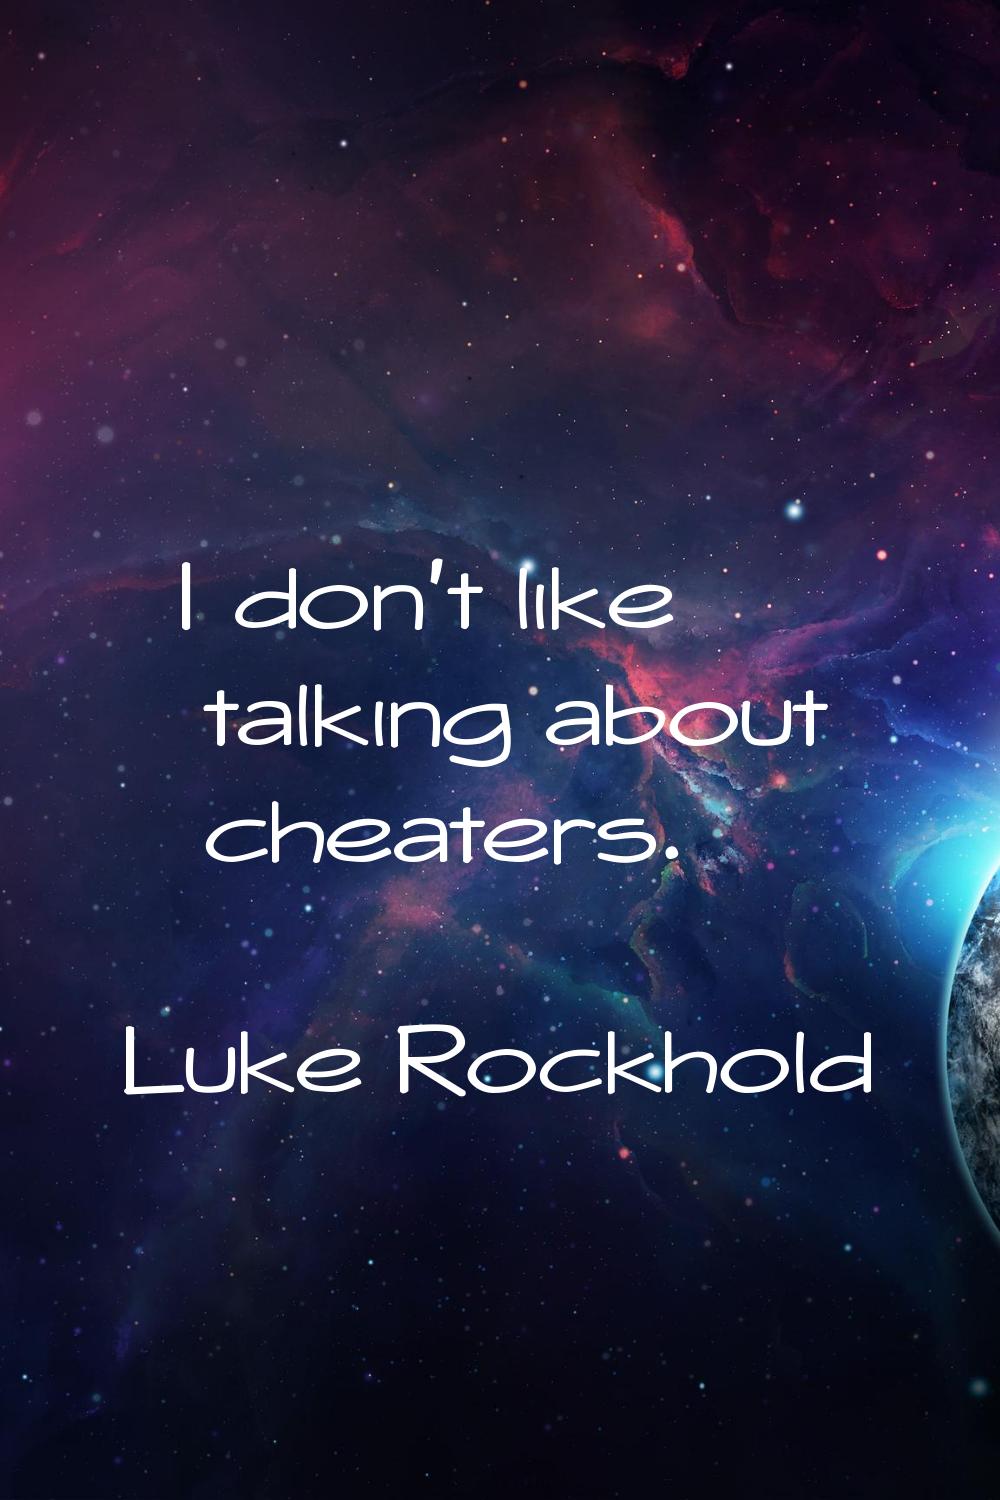 I don't like talking about cheaters.